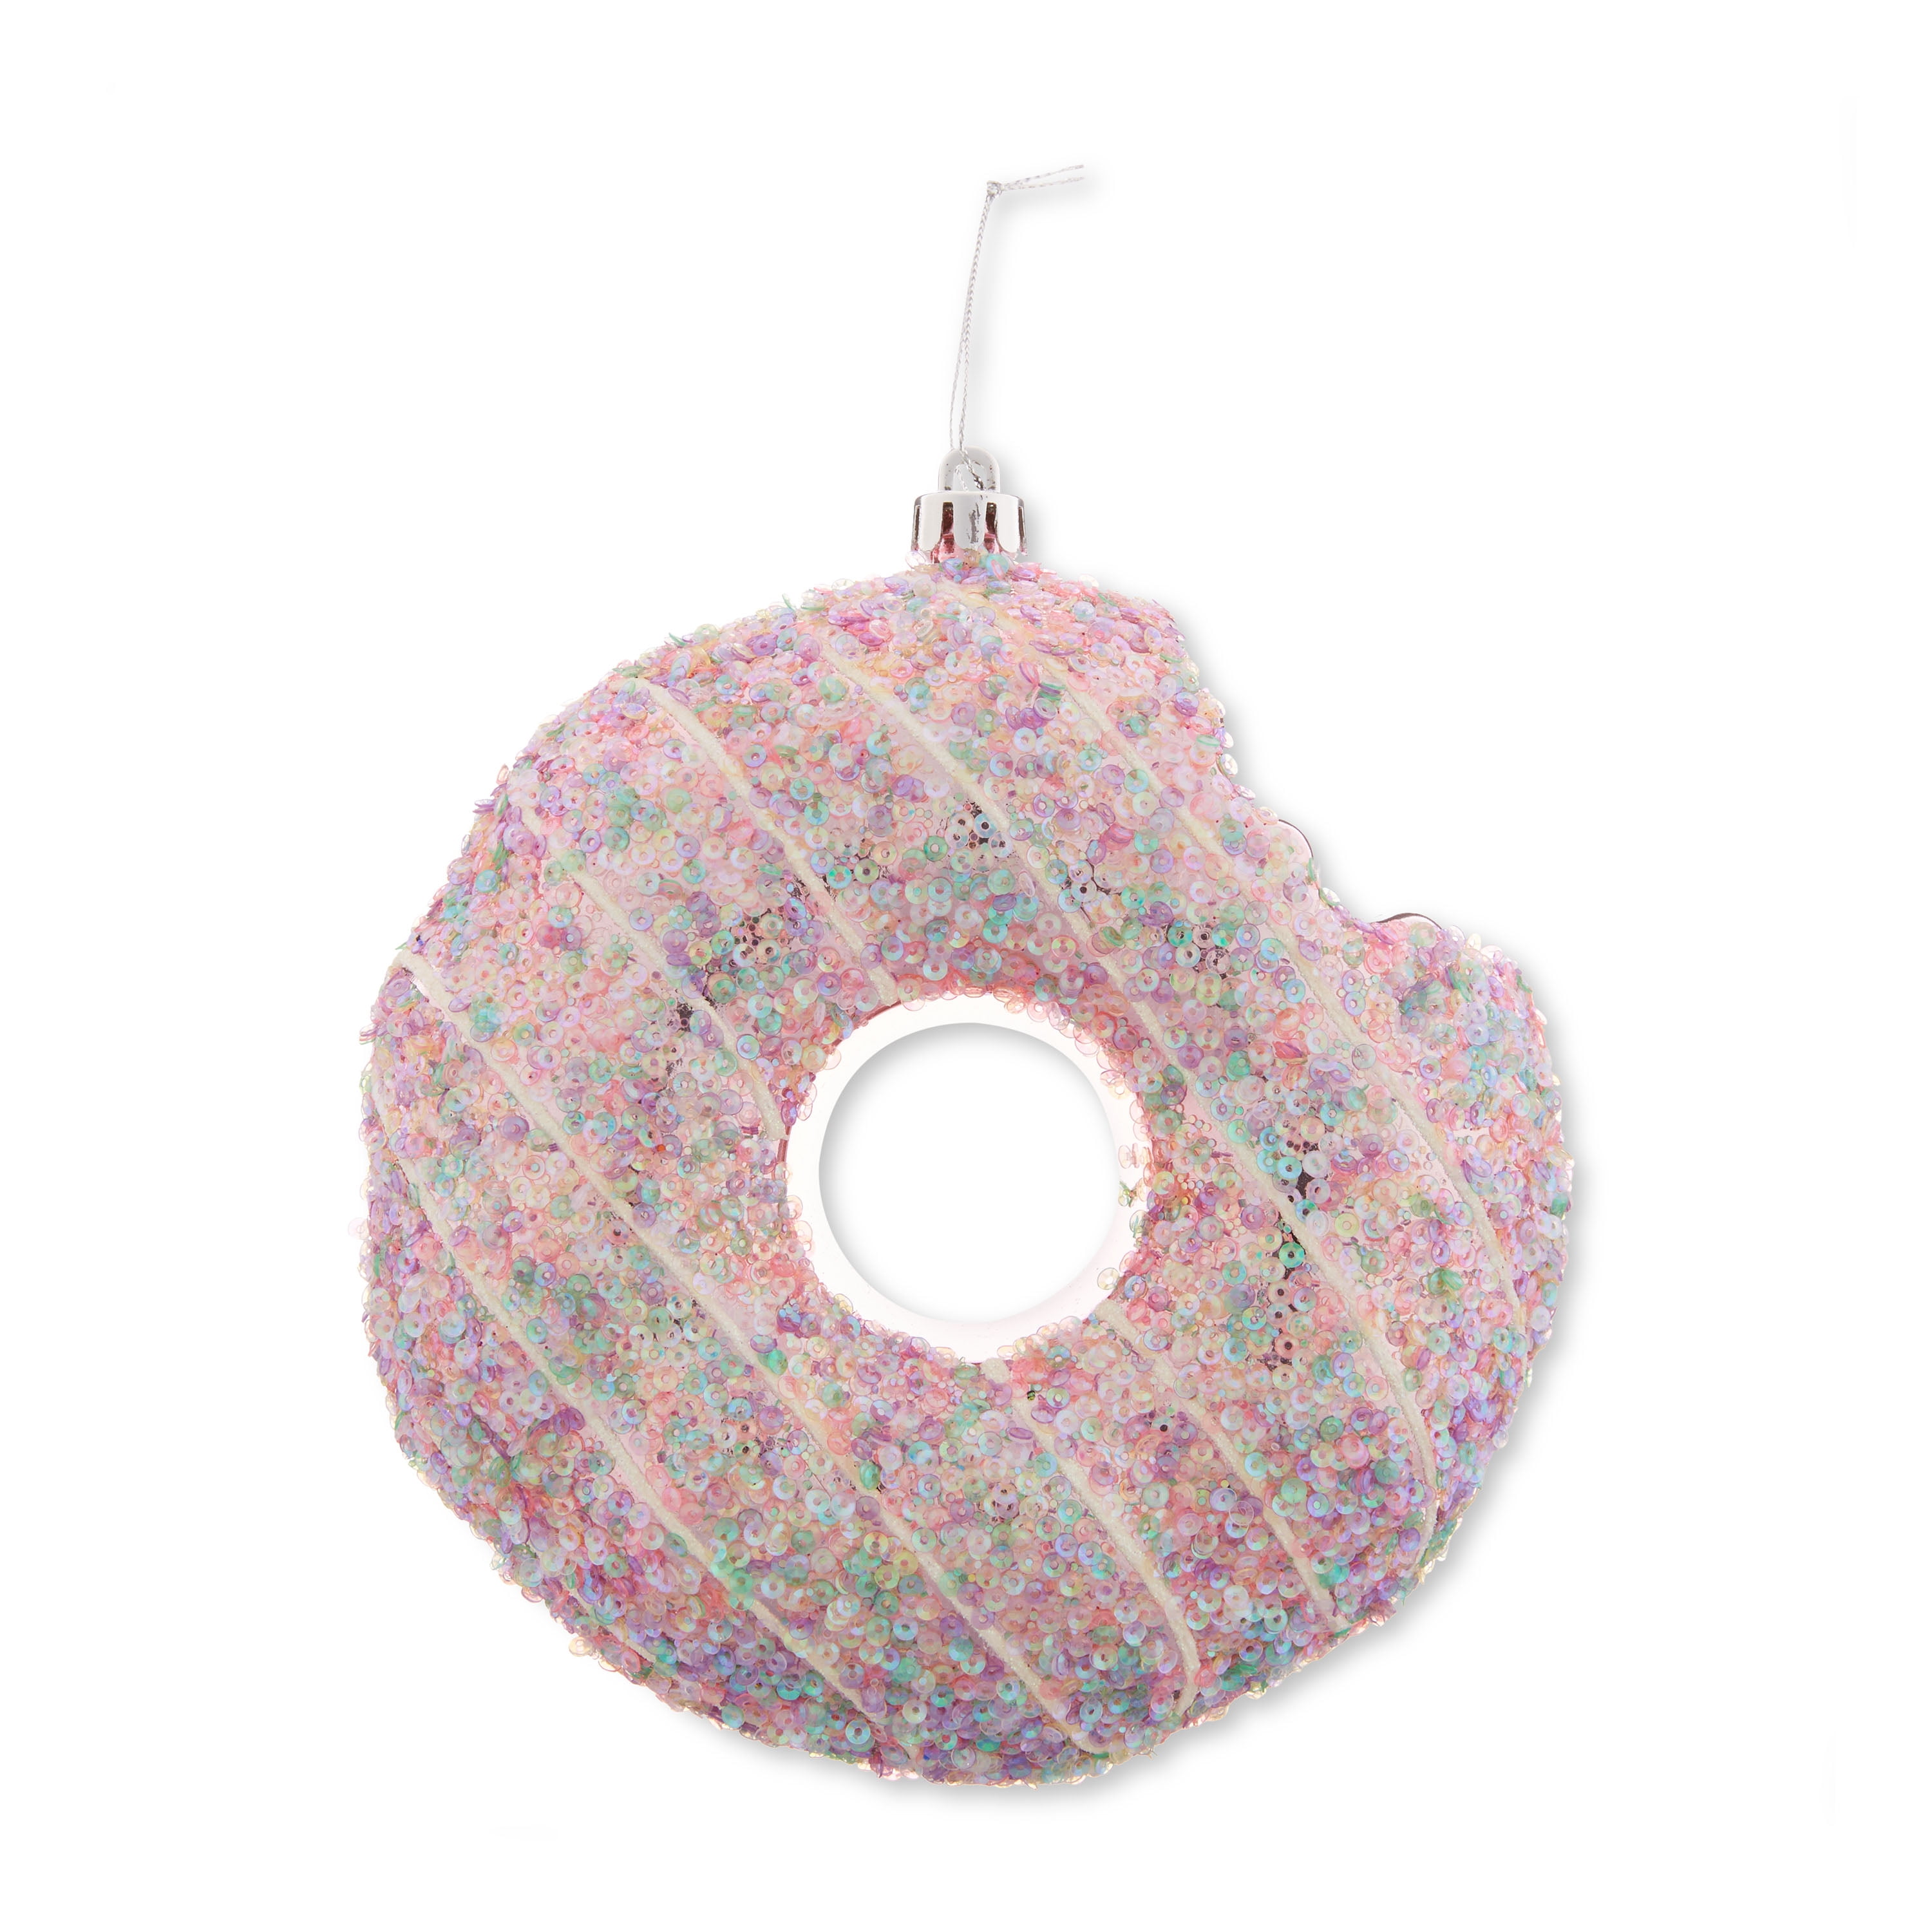 Jumbo Pink Donut Christmas Ornament, 6.3", by Holiday Time